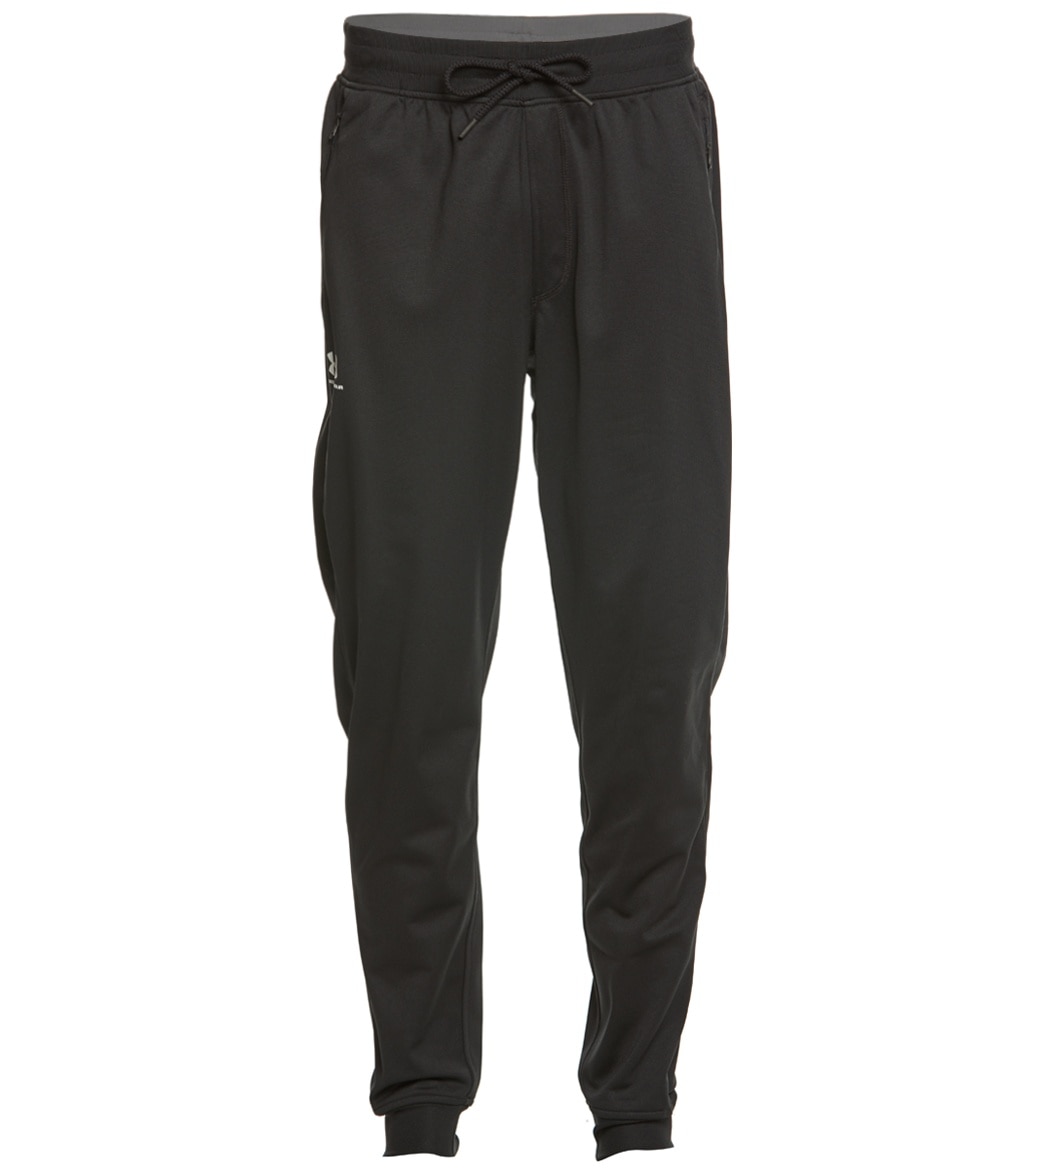 Under Armour Men's Sportstyle Tricot Jogger at SwimOutlet.com - Free ...